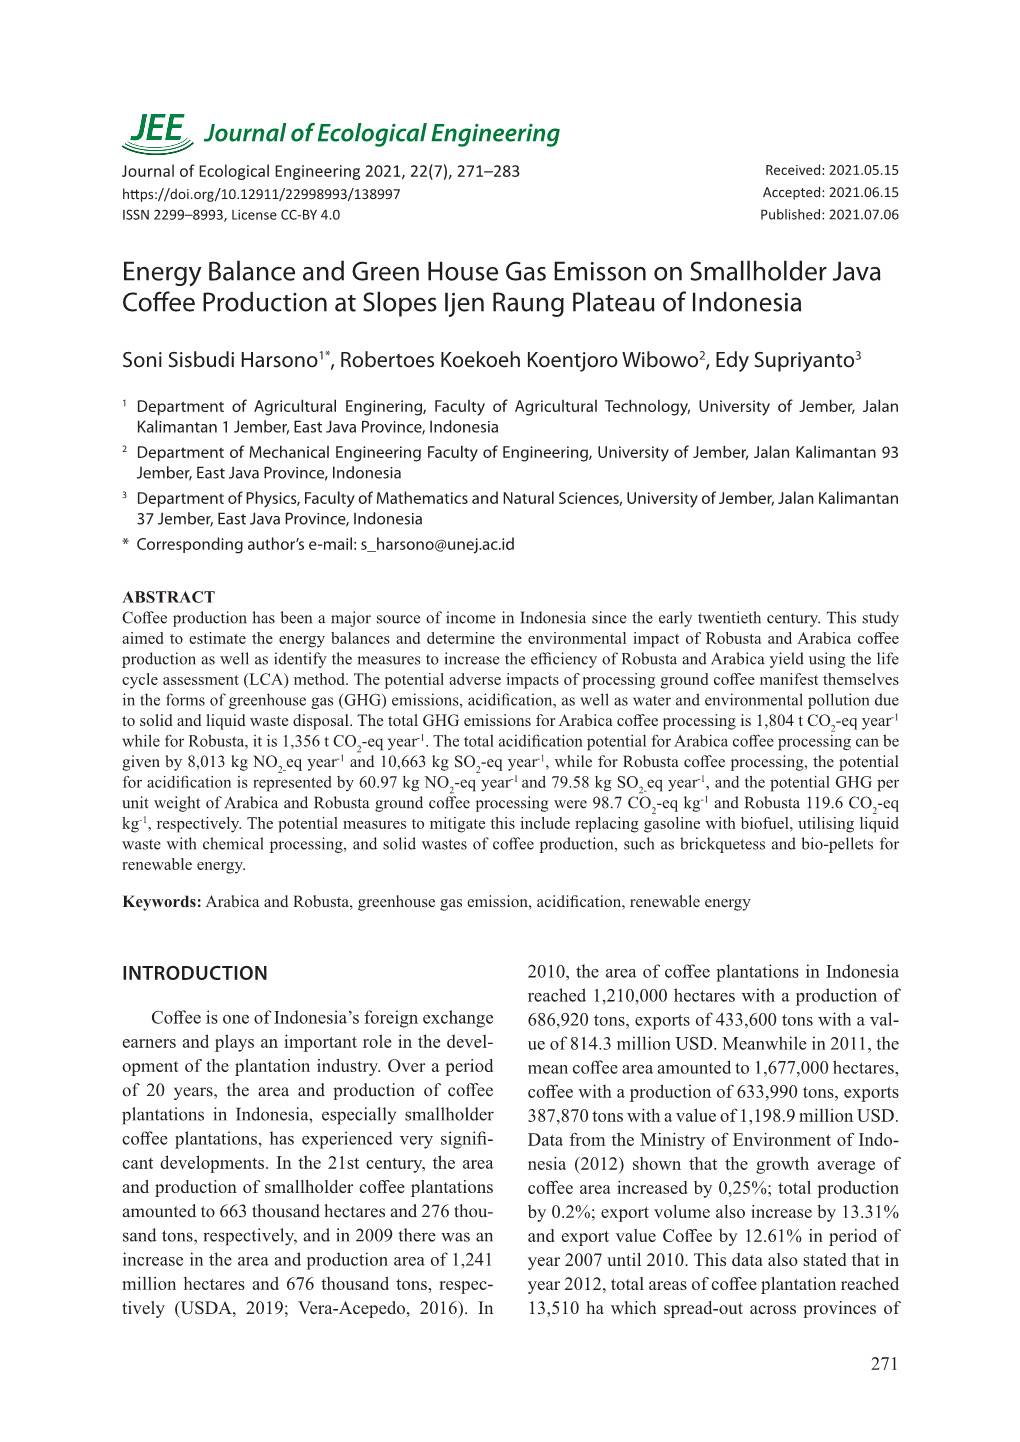 Energy Balance and Green House Gas Emisson on Smallholder Java Coffee Production at Slopes Ijen Raung Plateau of Indonesia